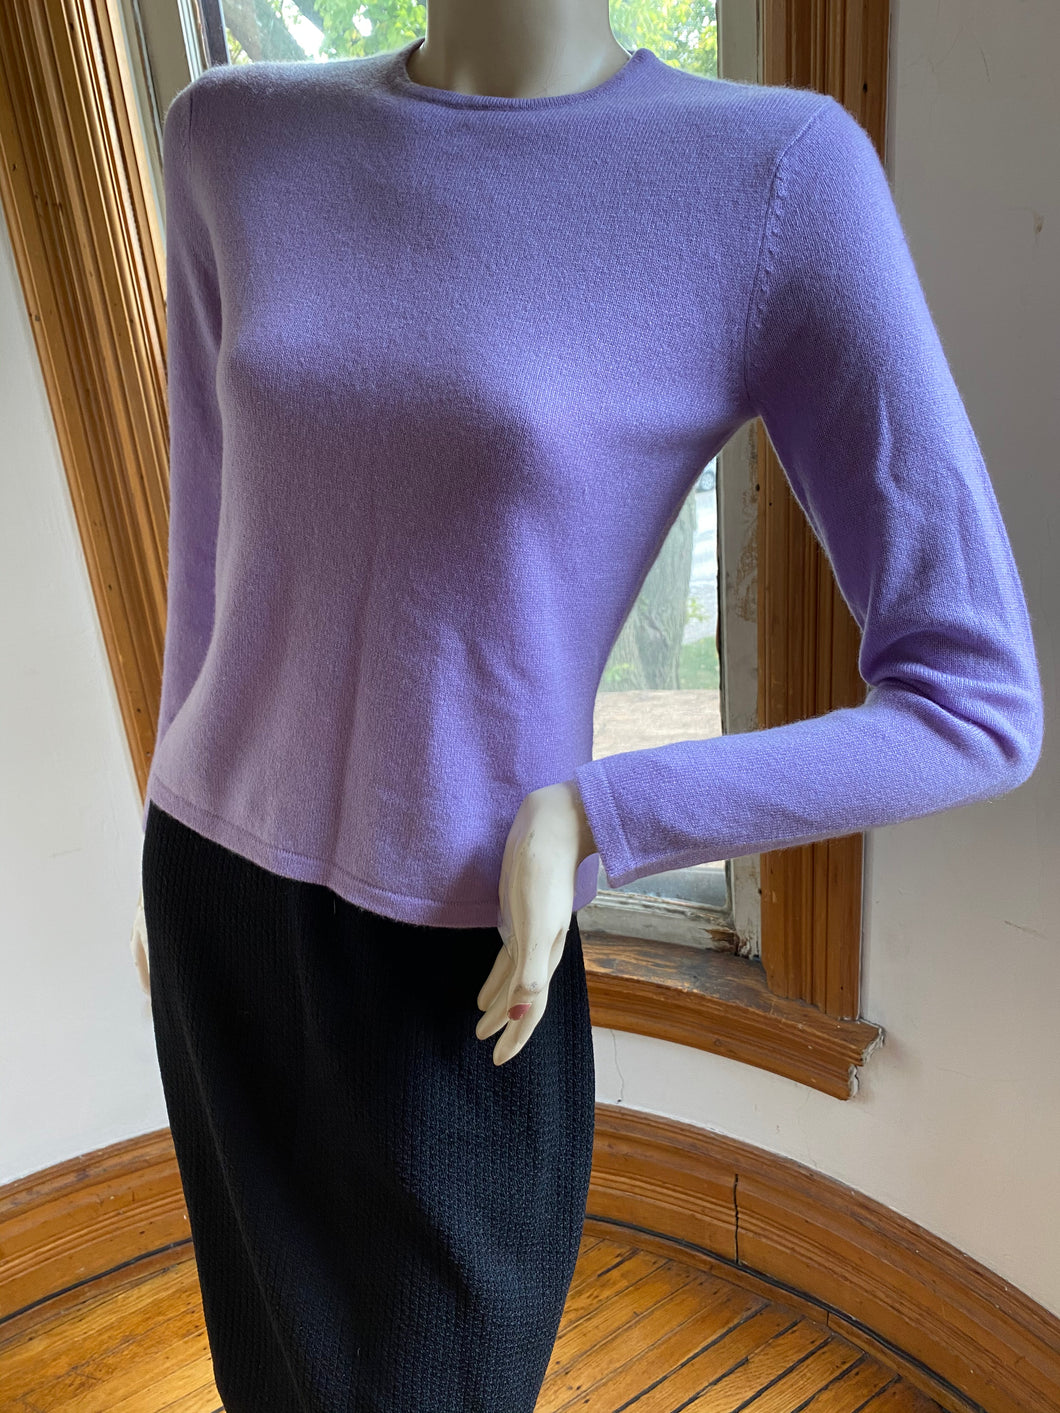 Marshall Field's Purple Cashmere Jewel Neck Pullover Sweater, size XS (PP)